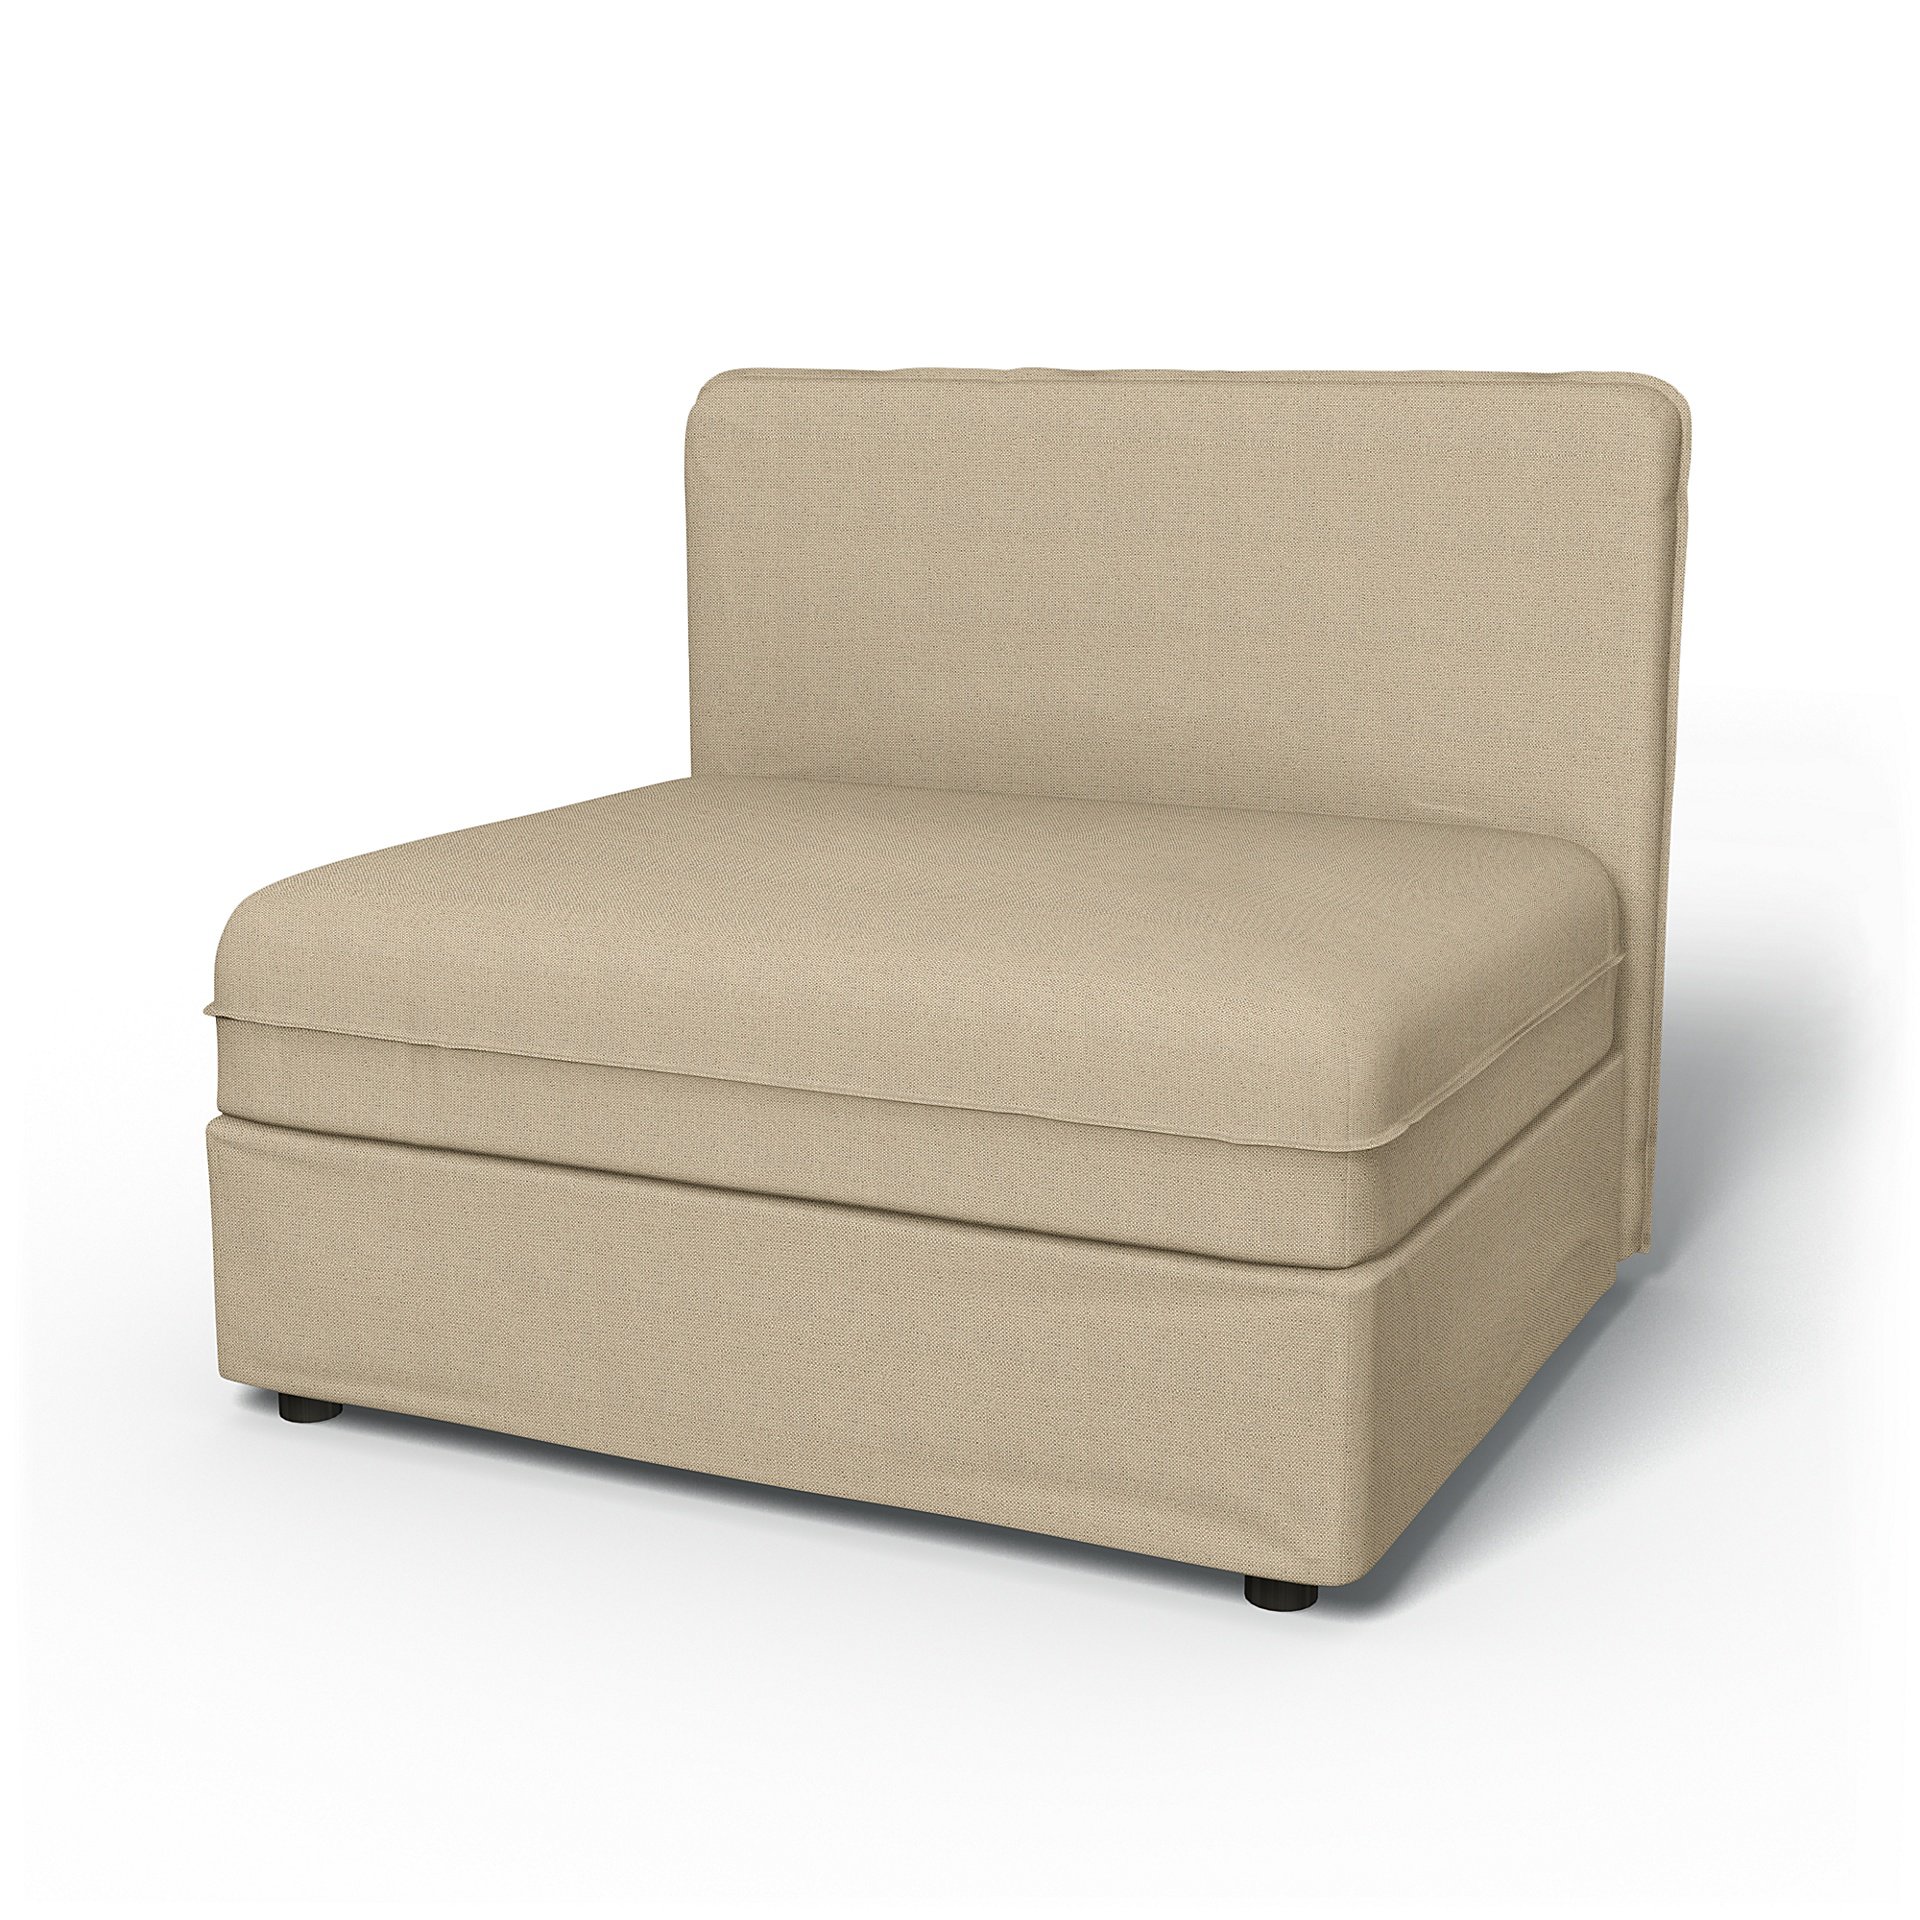 IKEA - Vallentuna Seat Module with Low Back Cover 100x80cm 39x32in, Unbleached, Linen - Bemz